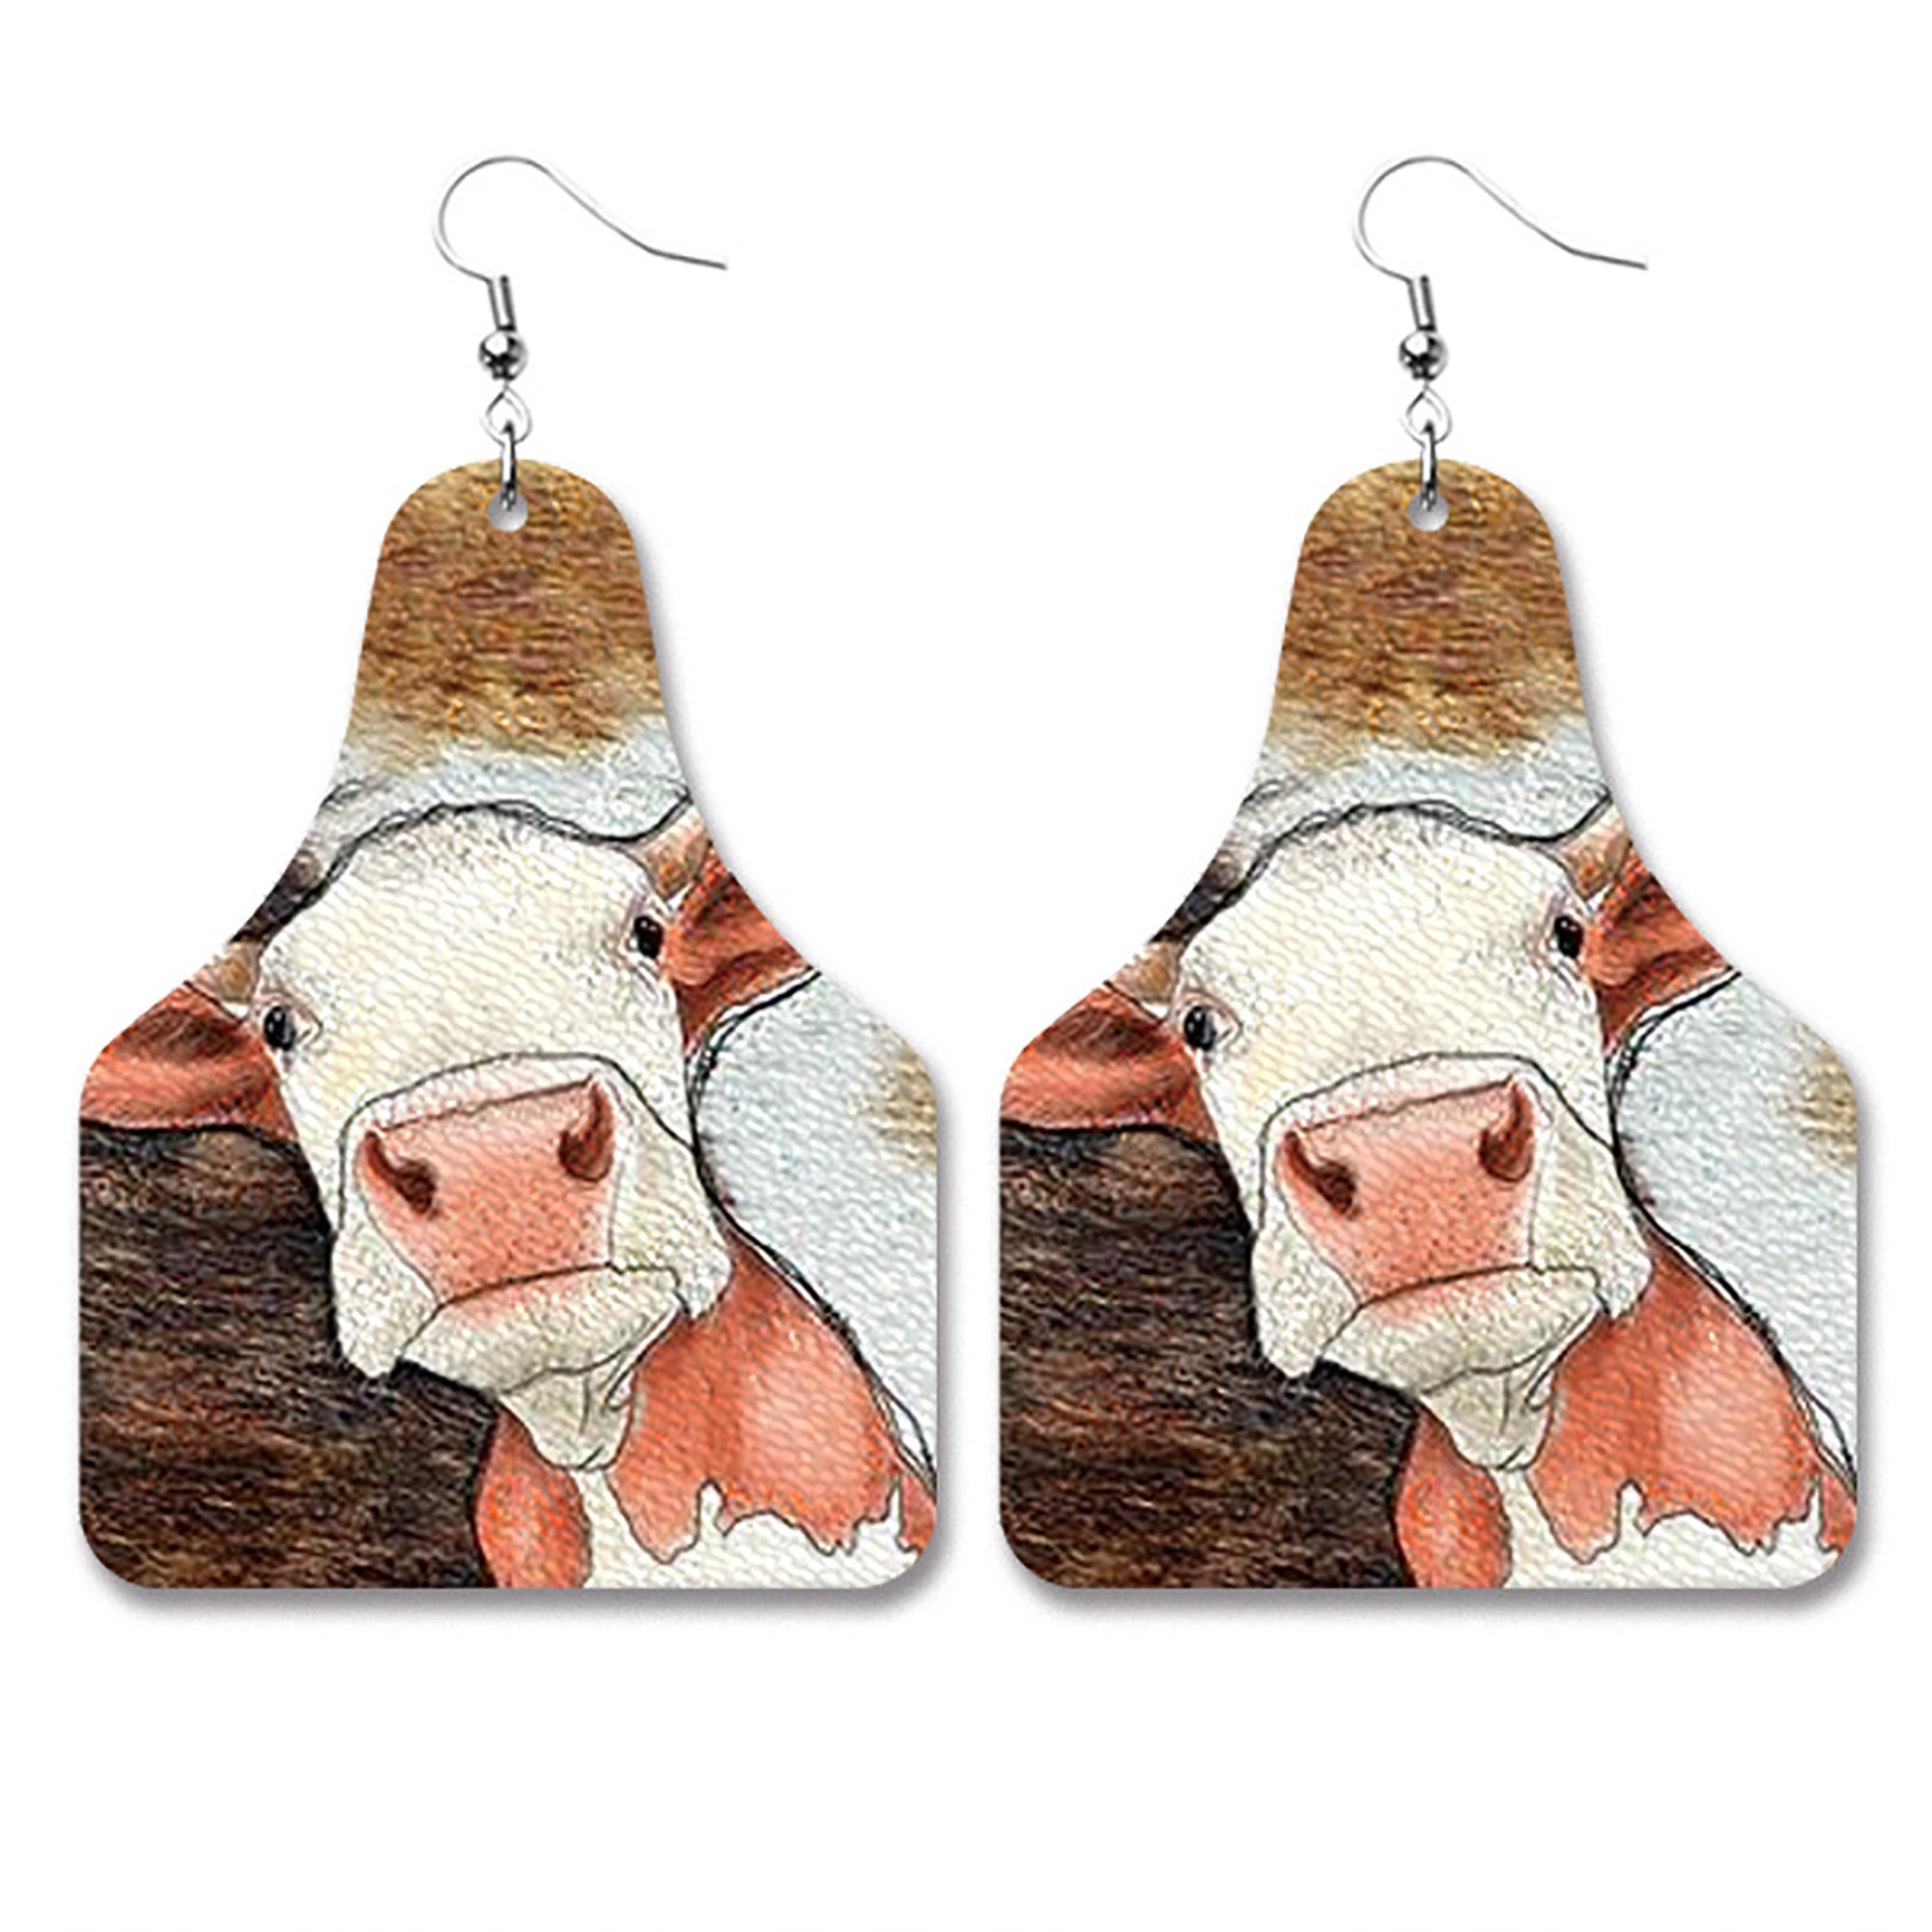 Cow Tag Earring Handmade Cow Print Earring Leather Dangle | Etsy